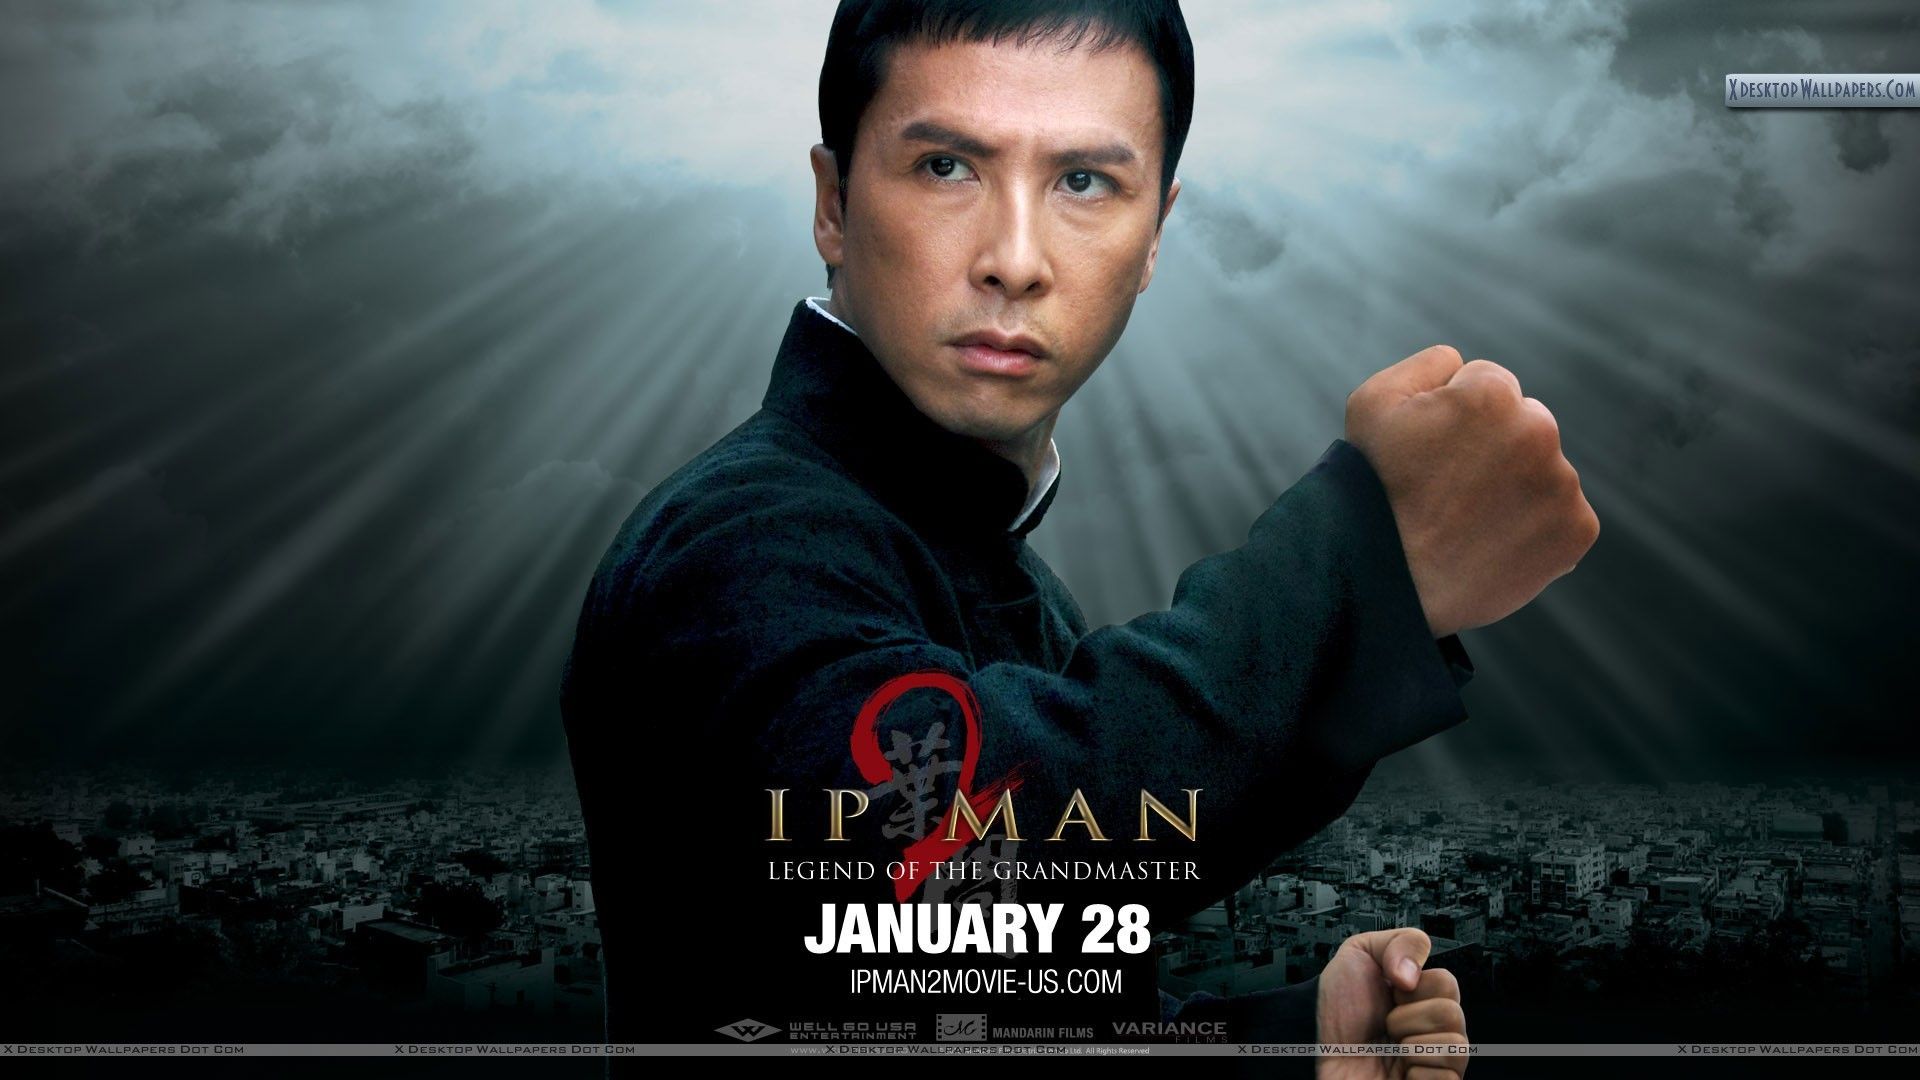 IP Man 2 Wallpapers, Photos & Images in HD